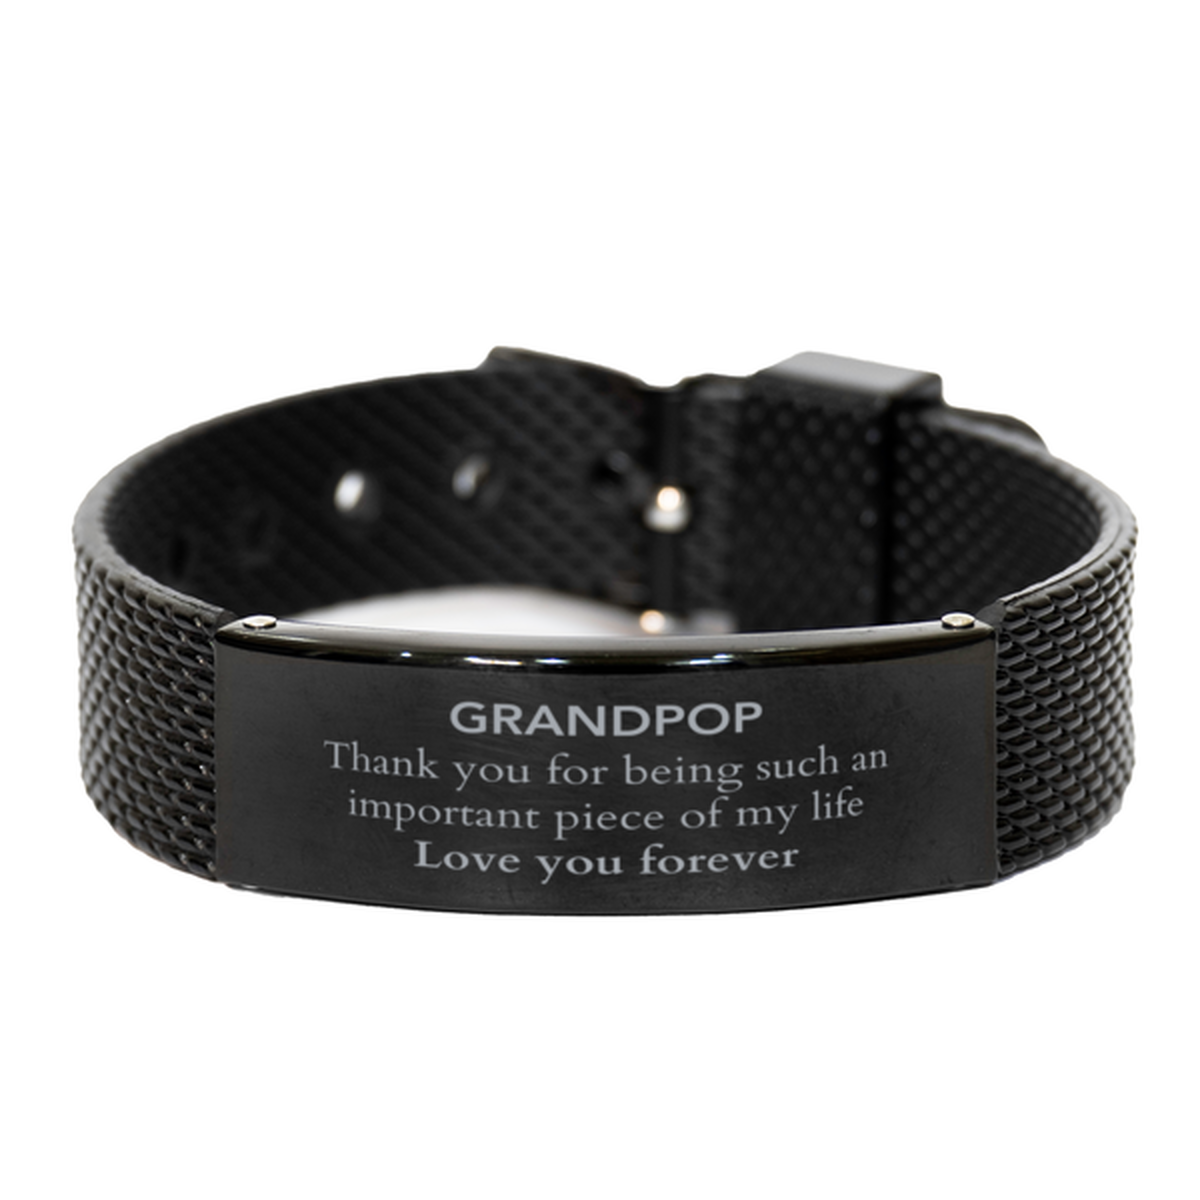 Appropriate Grandpop Black Shark Mesh Bracelet Epic Birthday Gifts for Grandpop Thank you for being such an important piece of my life Grandpop Christmas Mothers Fathers Day